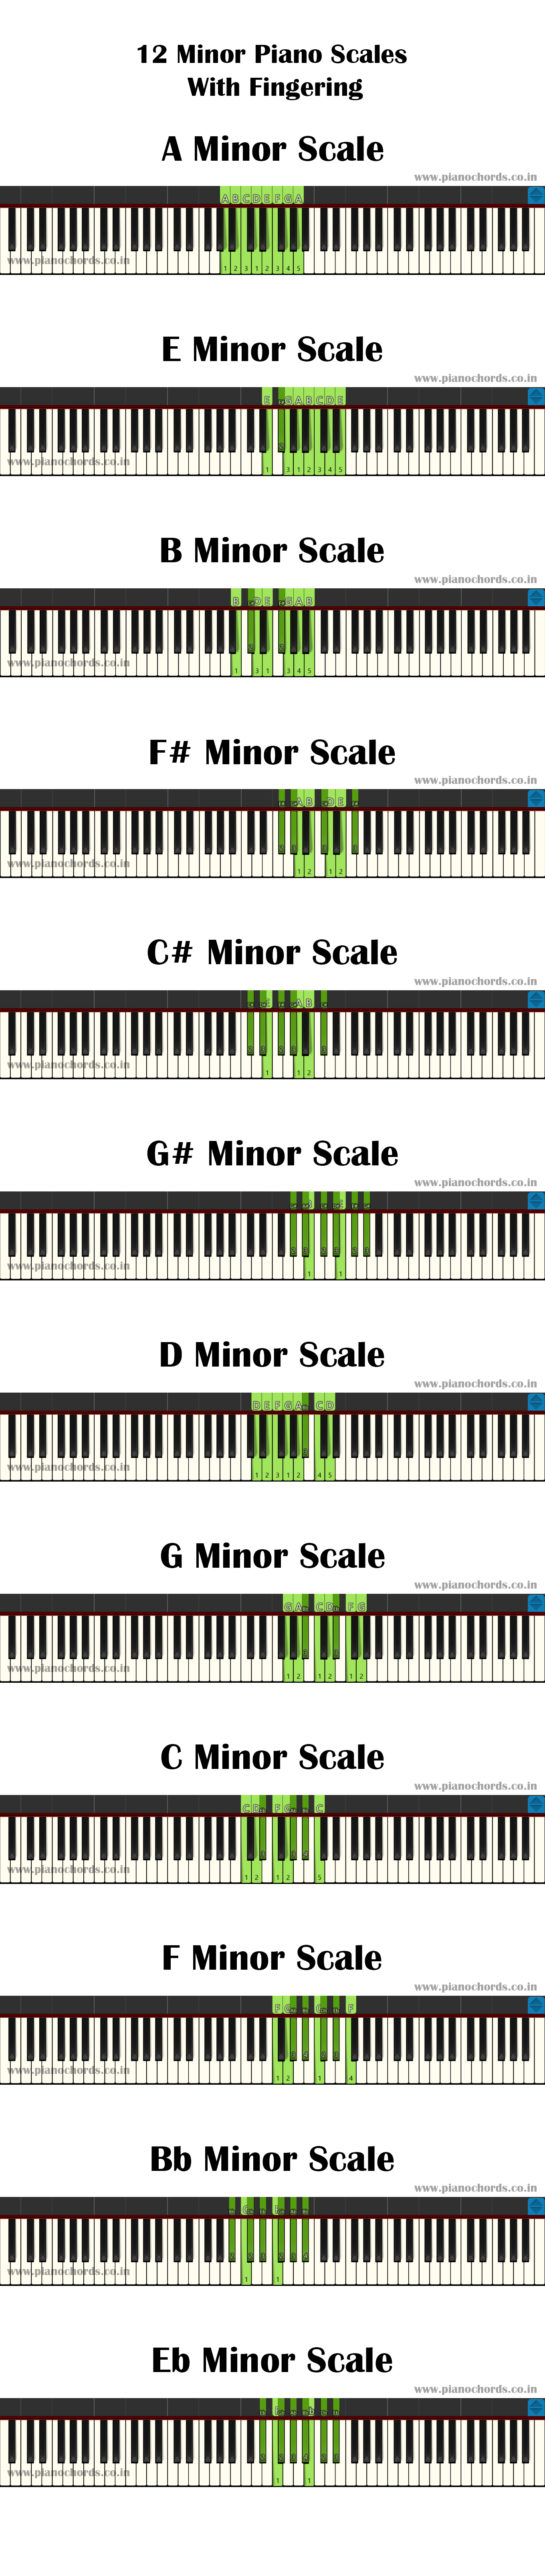 12 Minor Piano Scales With Fingering